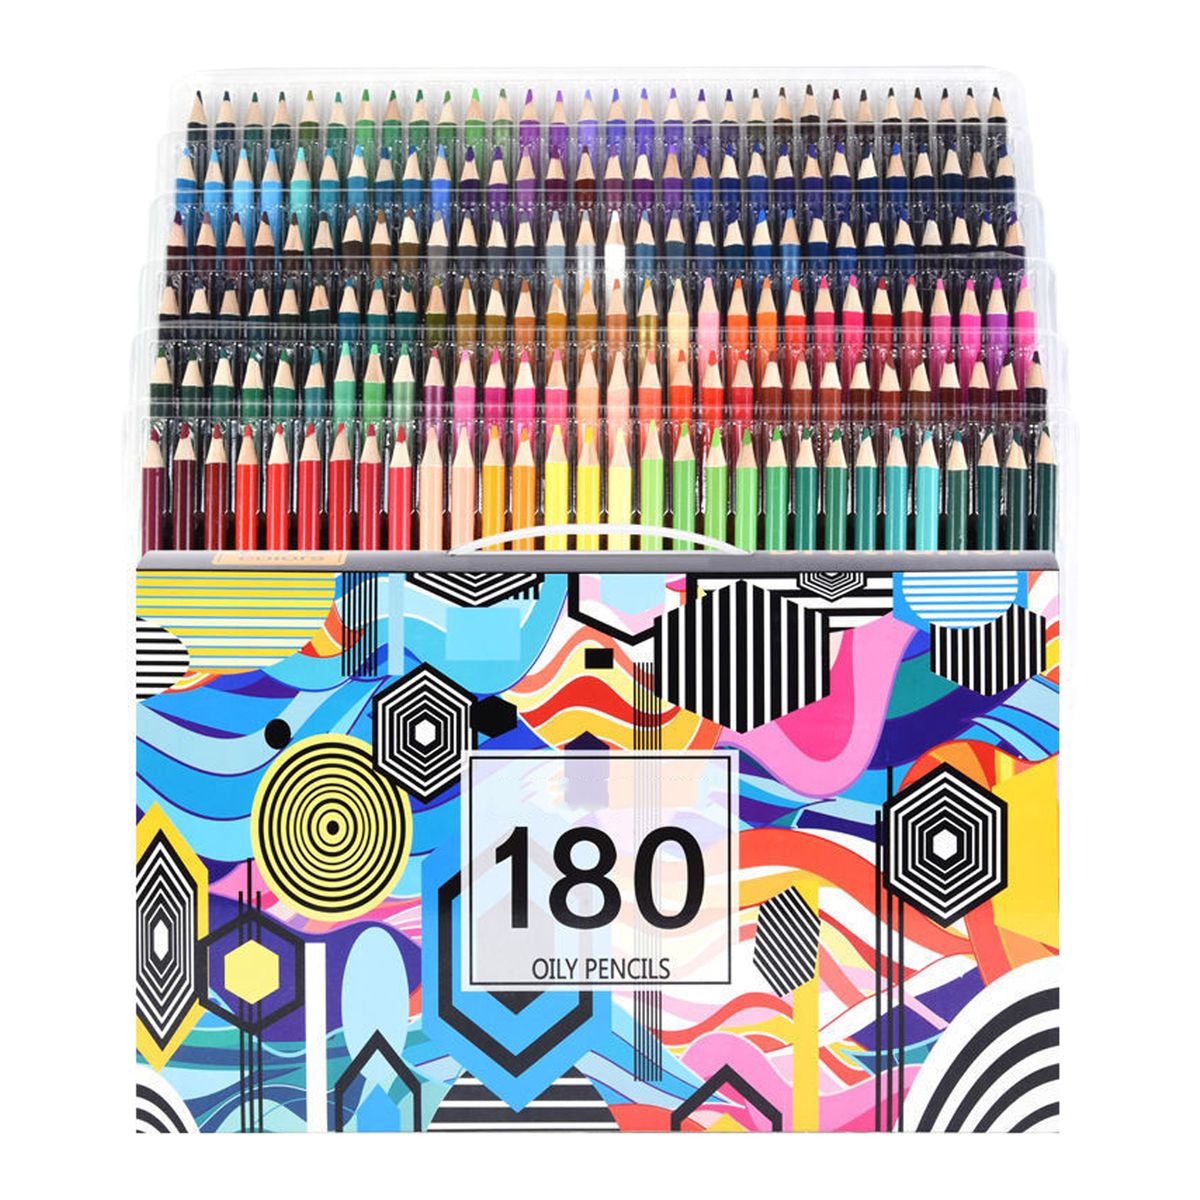 Finenolo 72 Colored Pencils for Adult Coloring Books, Soft Core, Art Drawing Pencils for Artists Kids Beginners, Coloring Pencils Set with Sharpener